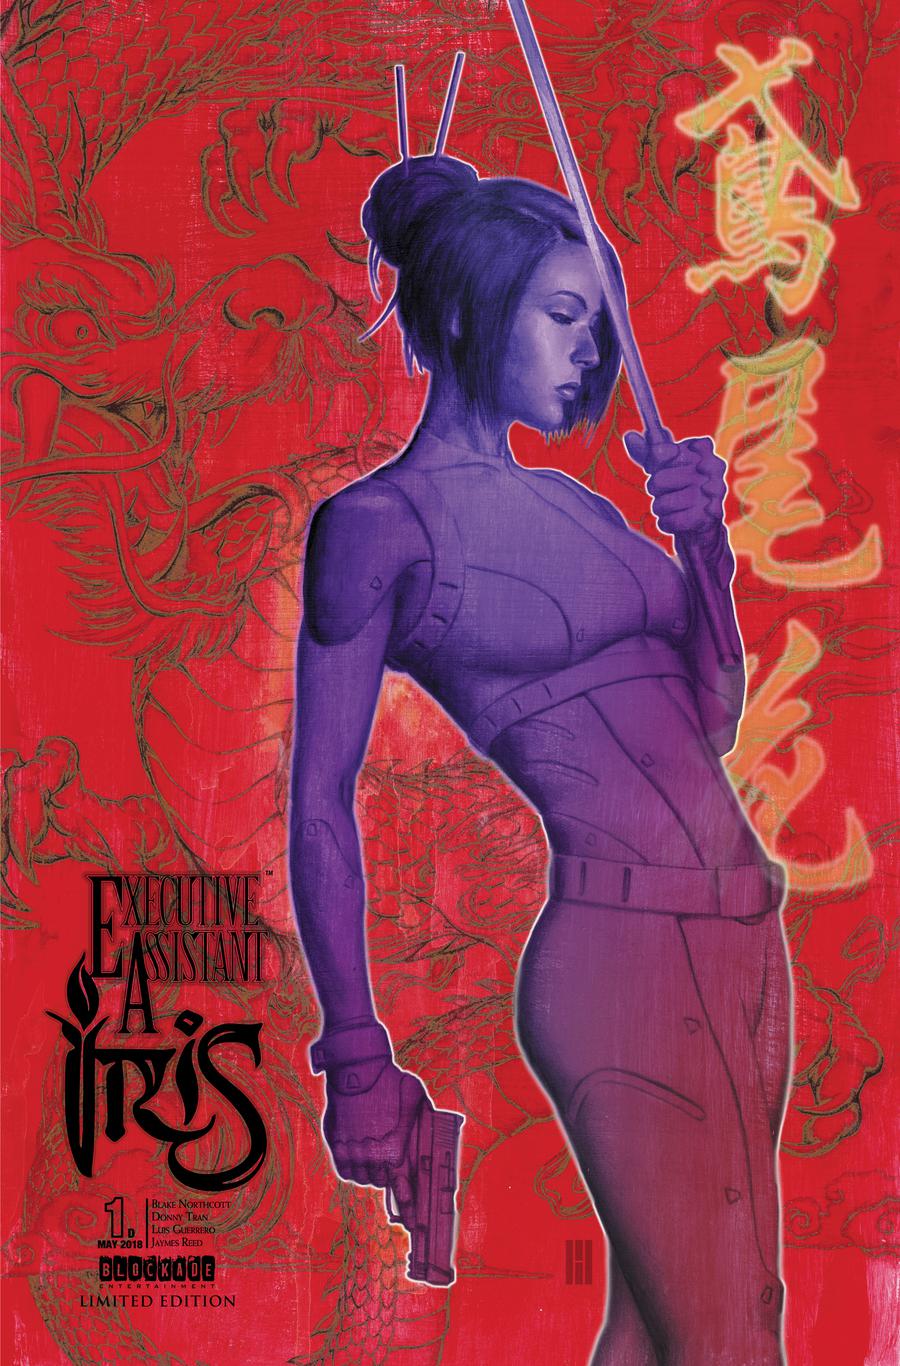 Executive Assistant Iris Vol 4 #1 Cover C Incentive Mike Choi Variant Cover